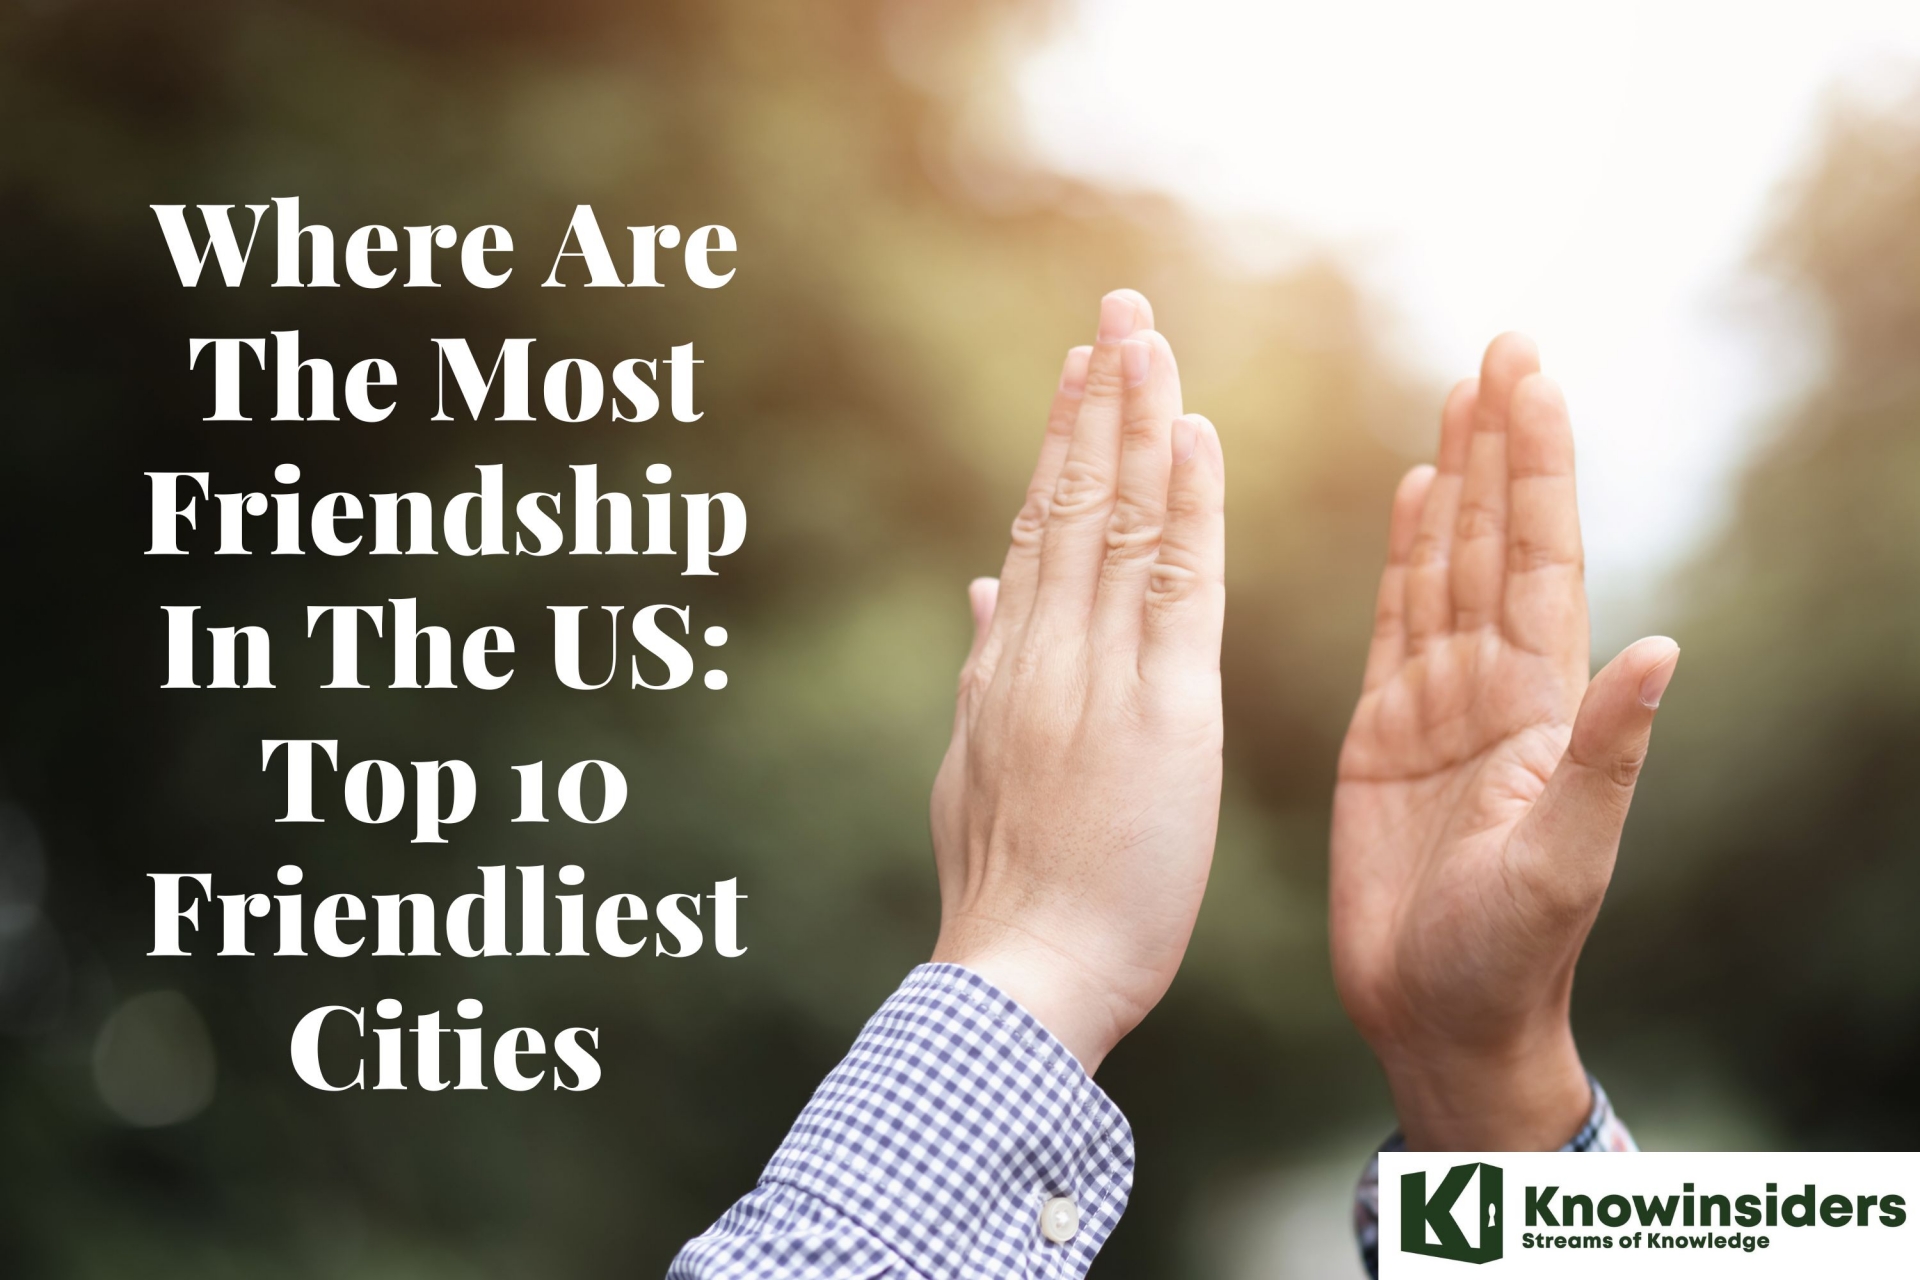 Where Are The Most Friendship In The US: Top 10 Friendliest Cities